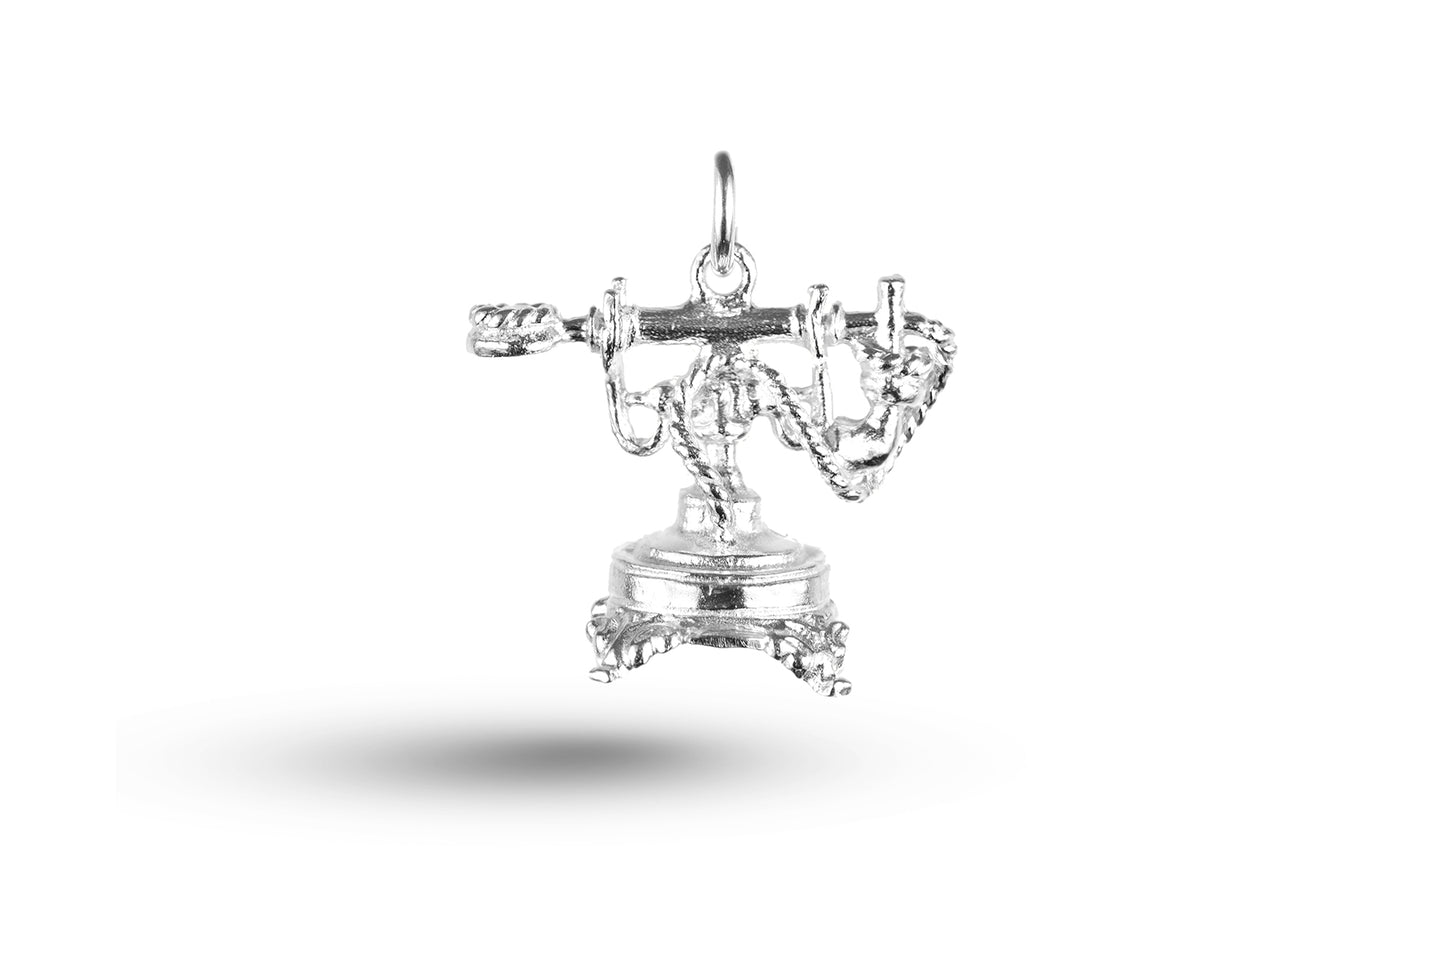 White gold Old Fashioned Candlestick Telephone charm.